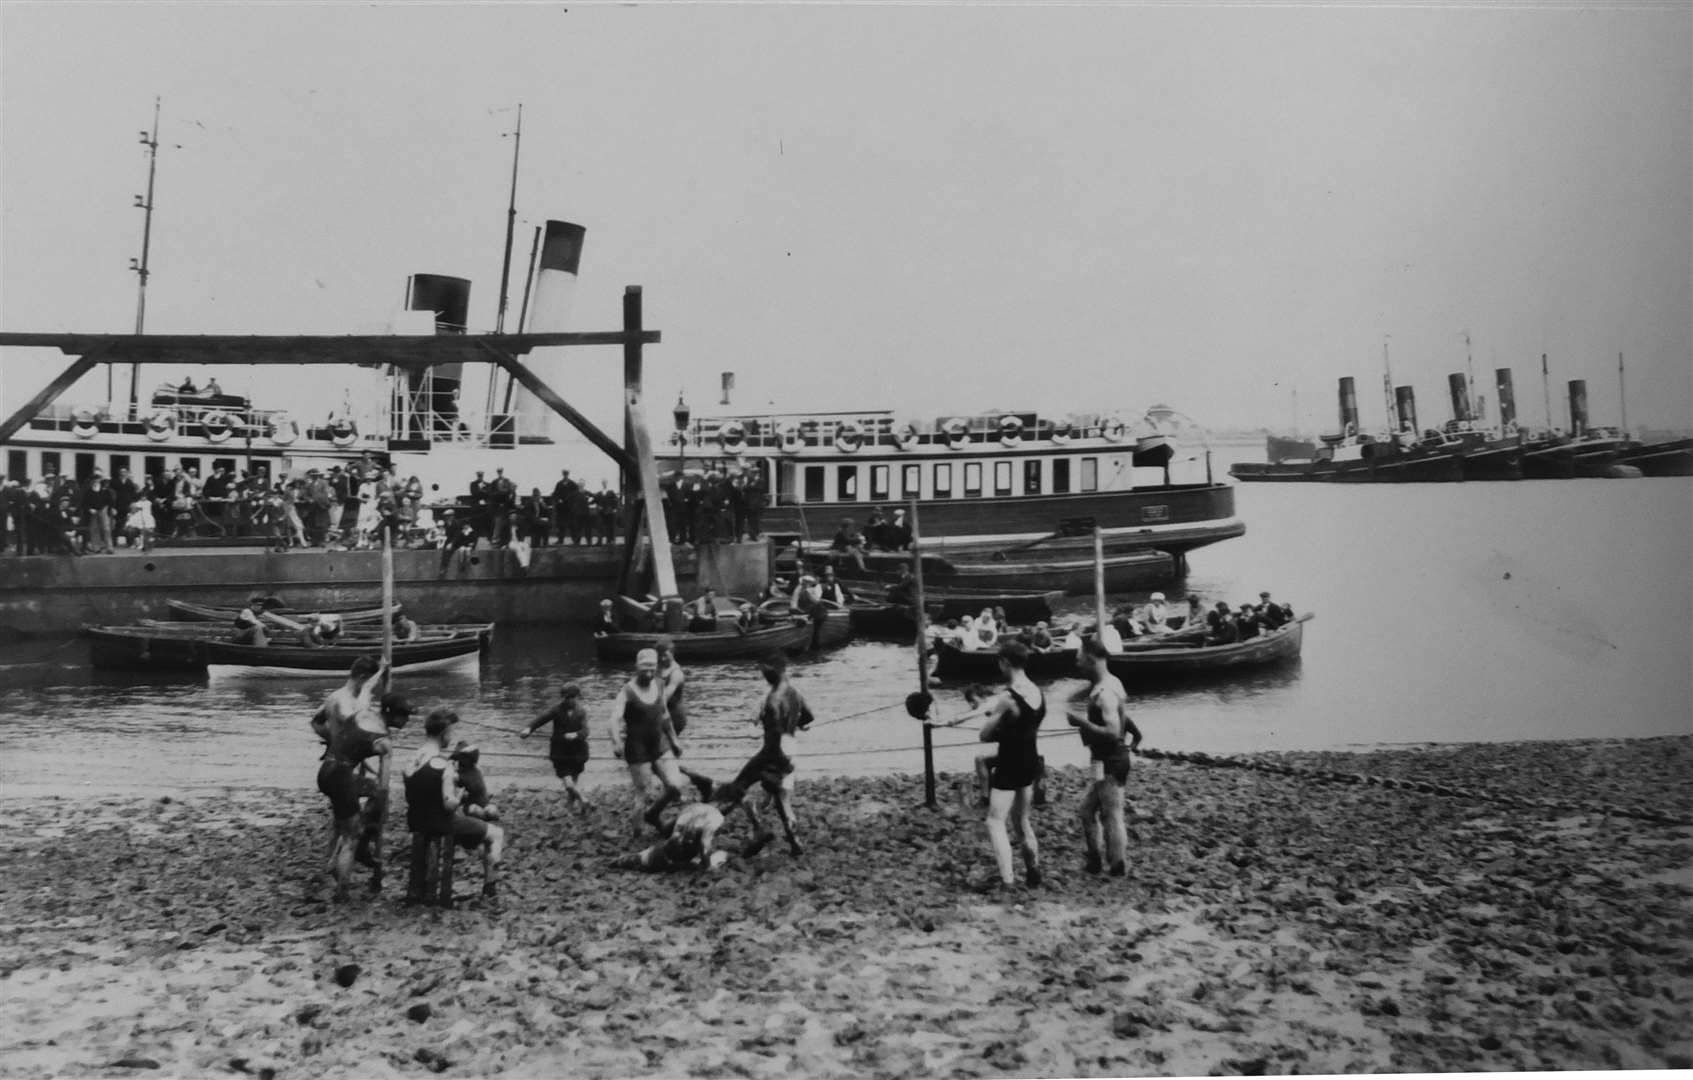 The mudlarks of Gravesend in a boxing or wrestling match on the muddy beach alongside Gravesend's Town Pier